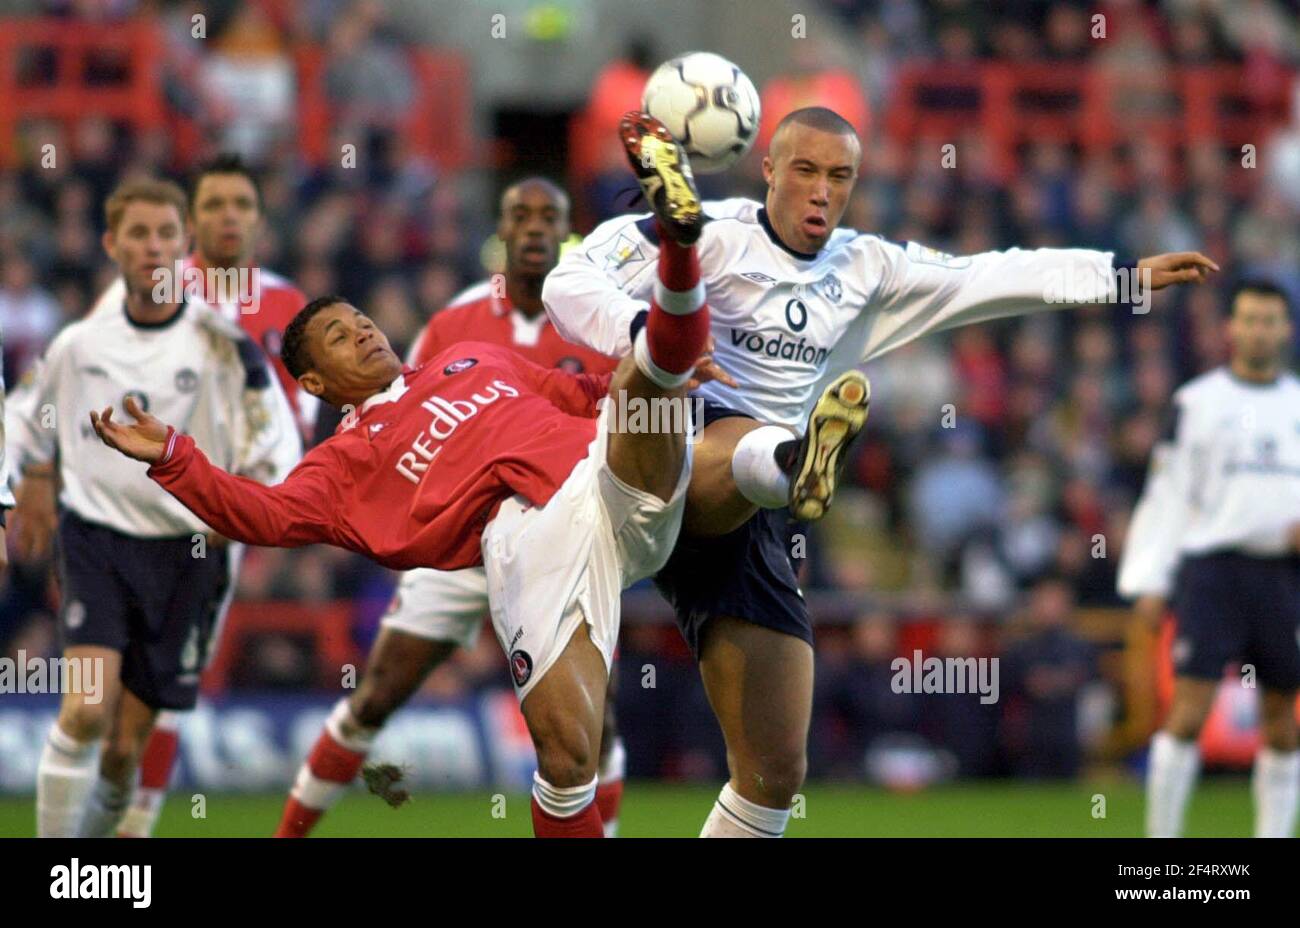 Charlton Athletic's Martin Pringle December 2000  clashes with during Mikael Silvestre  FA Carling Premiership match against Manchester United at The Valley, London Stock Photo